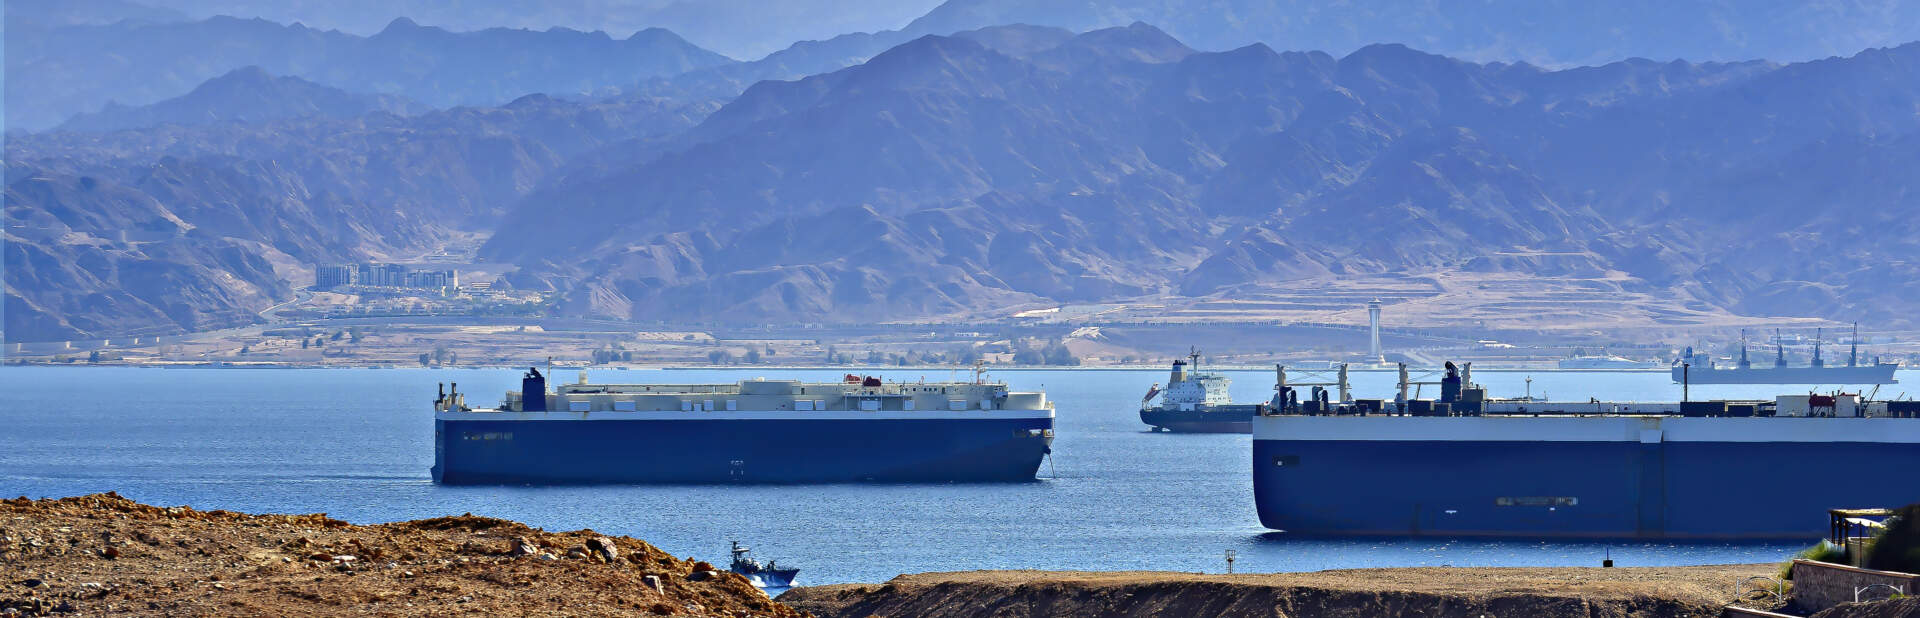 A container ship at sea. Conflict on the Red Sea is the latest example of supply chain complications impacting global trade.